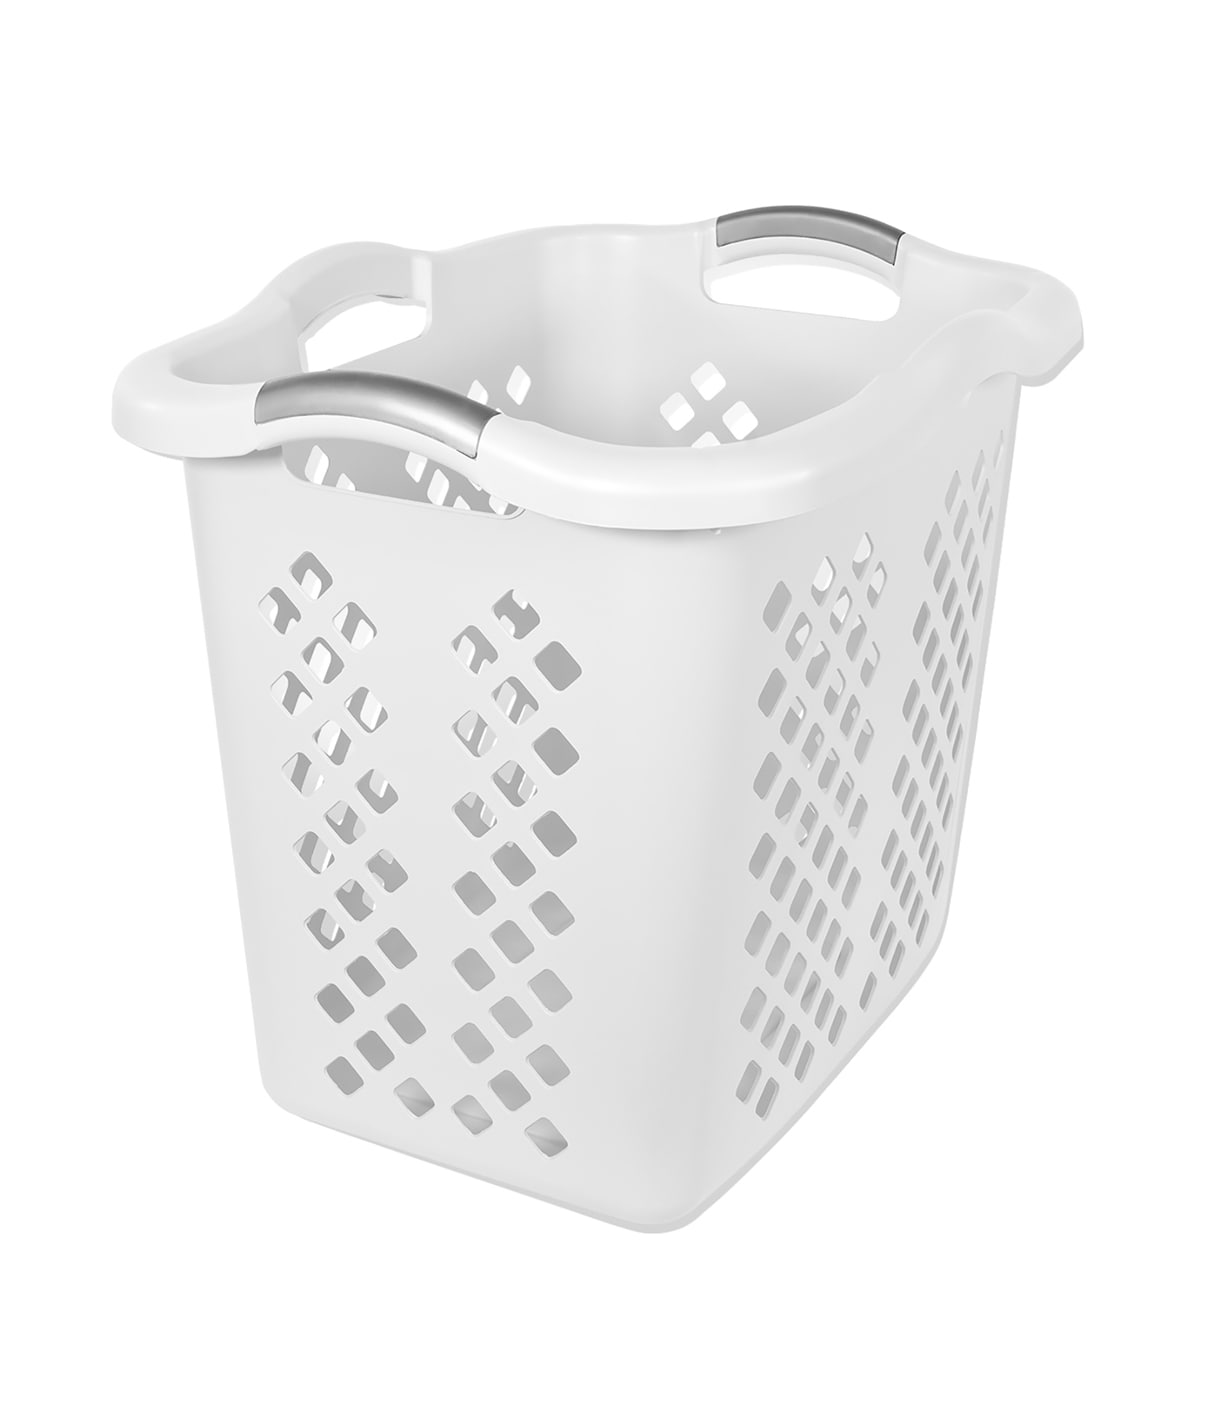 A Collapsible Laundry Basket = Stress-Free Laundry Day